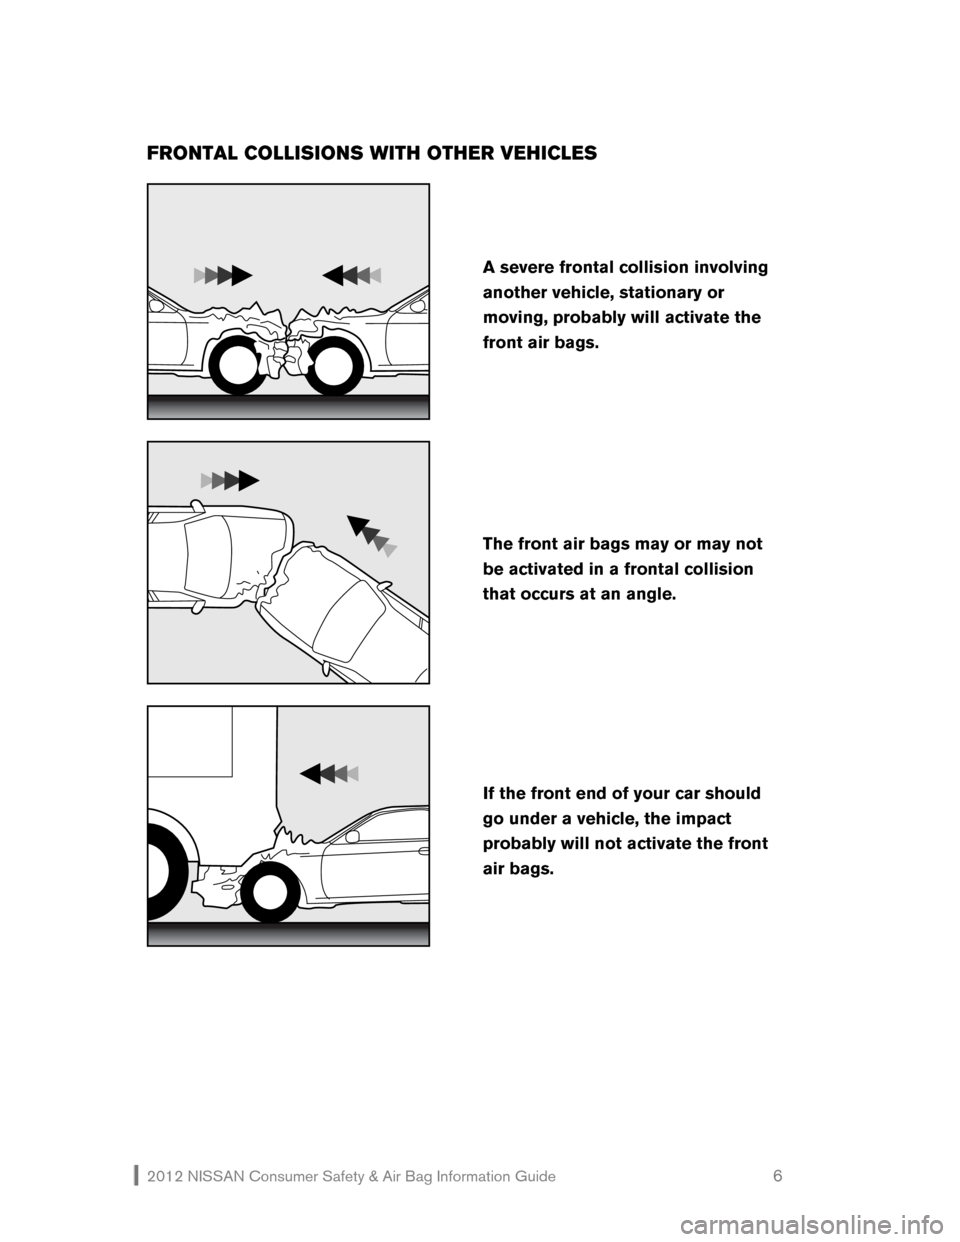 NISSAN NV200 2012 1.G Consumer Safety Air Bag Information Guide 2012 NISSAN Consumer Safety & Air Bag Information Guide                                                   6 
FRONTAL COLLISIONS WITH OTHER VEHICLES 
 
 
 
 
If the front end of your car should 
go und